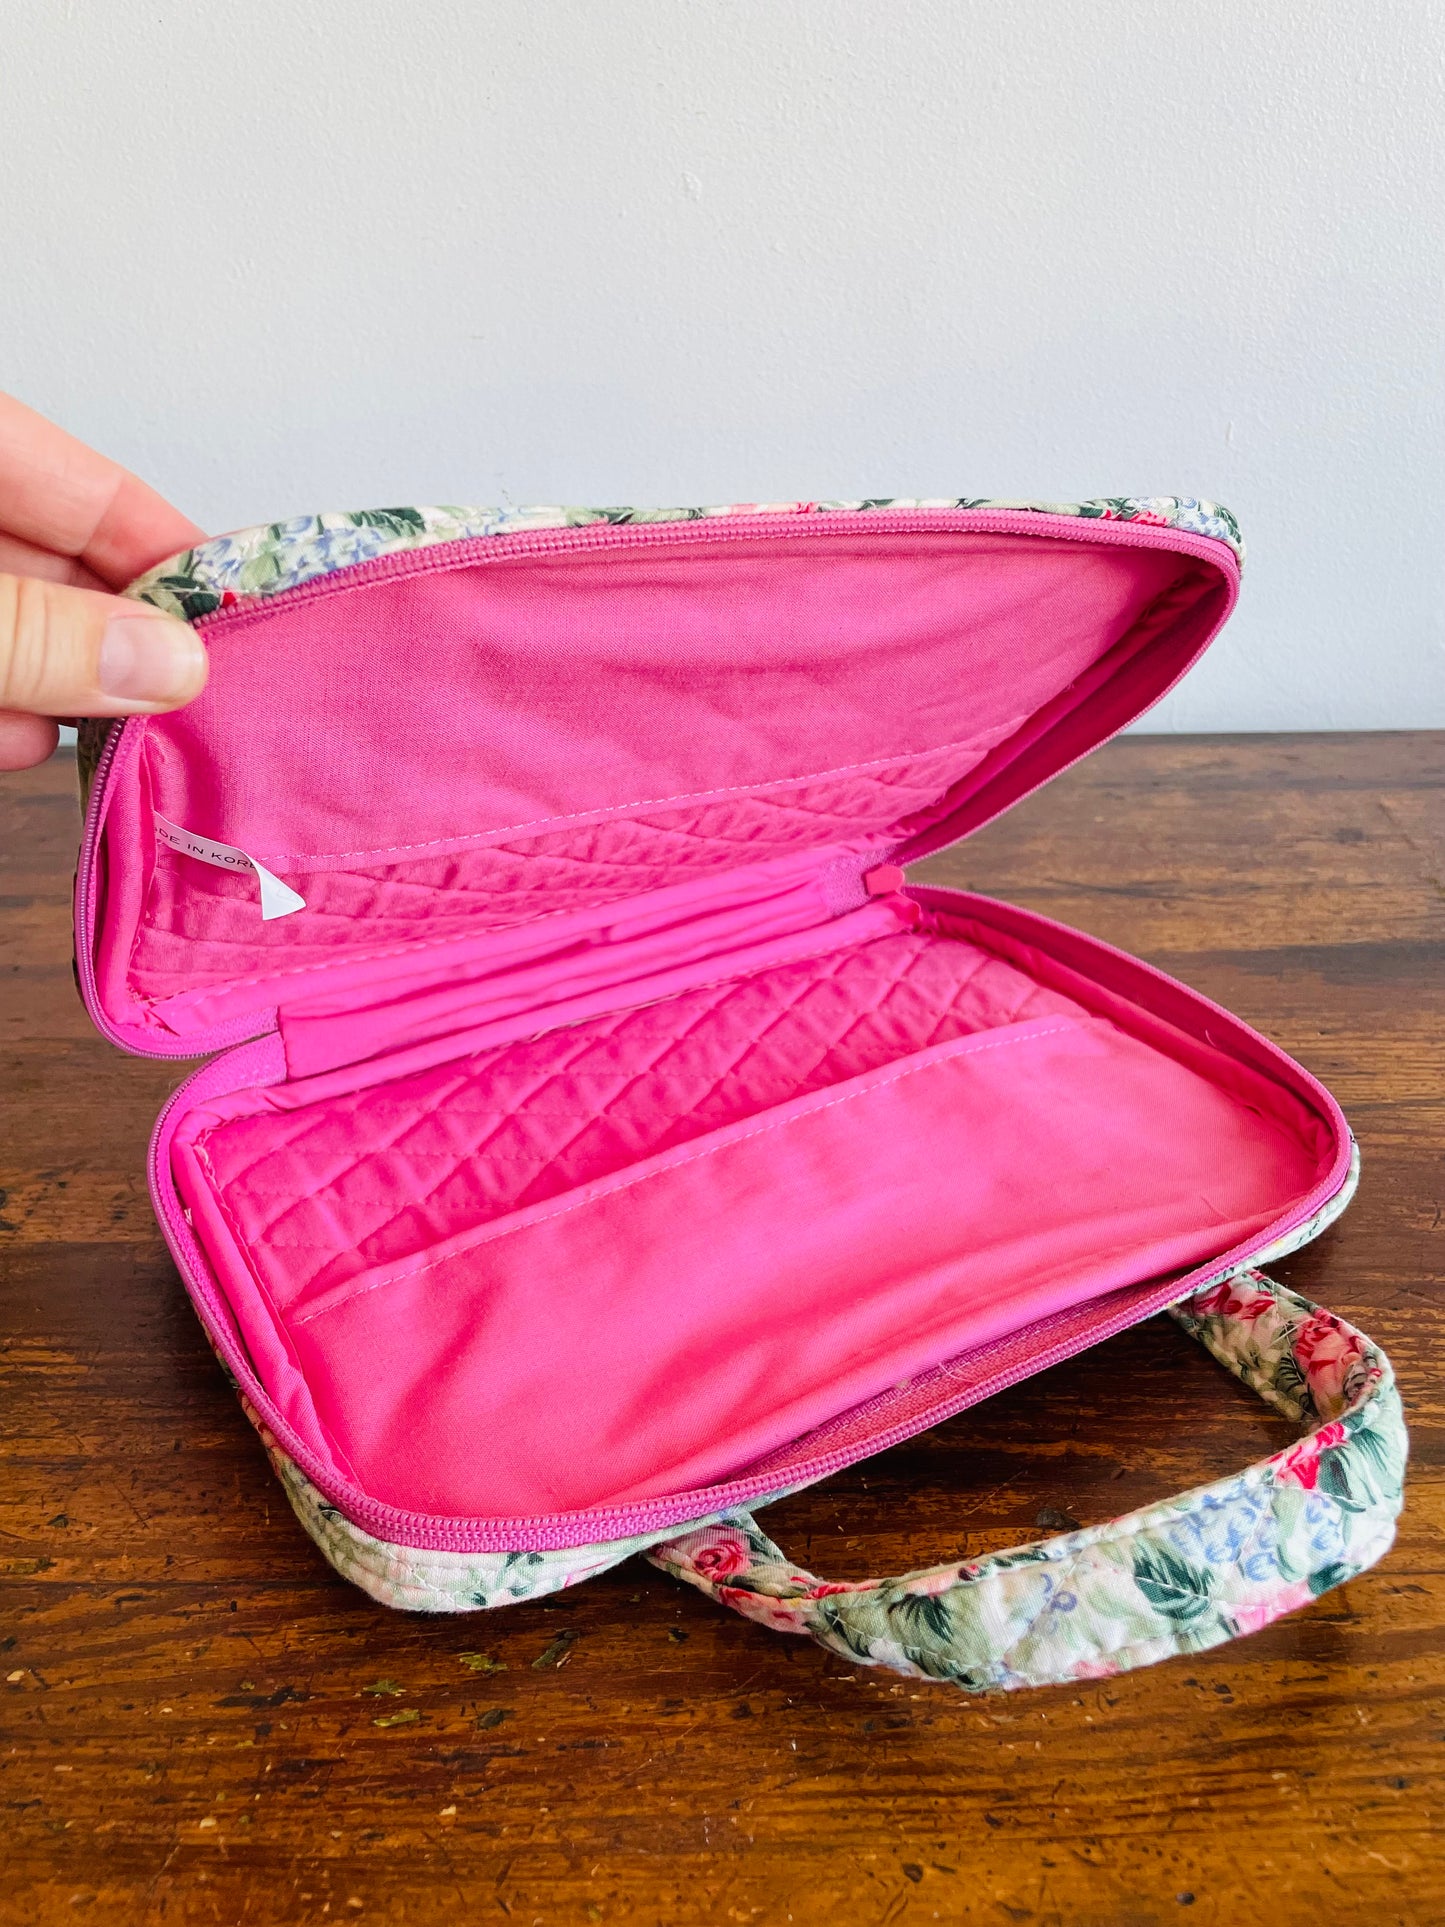 Quilted Floral Fabric Travel Case with Interior Compartments - Great for Jewellery, Makeup, Toiletries, Etc.!